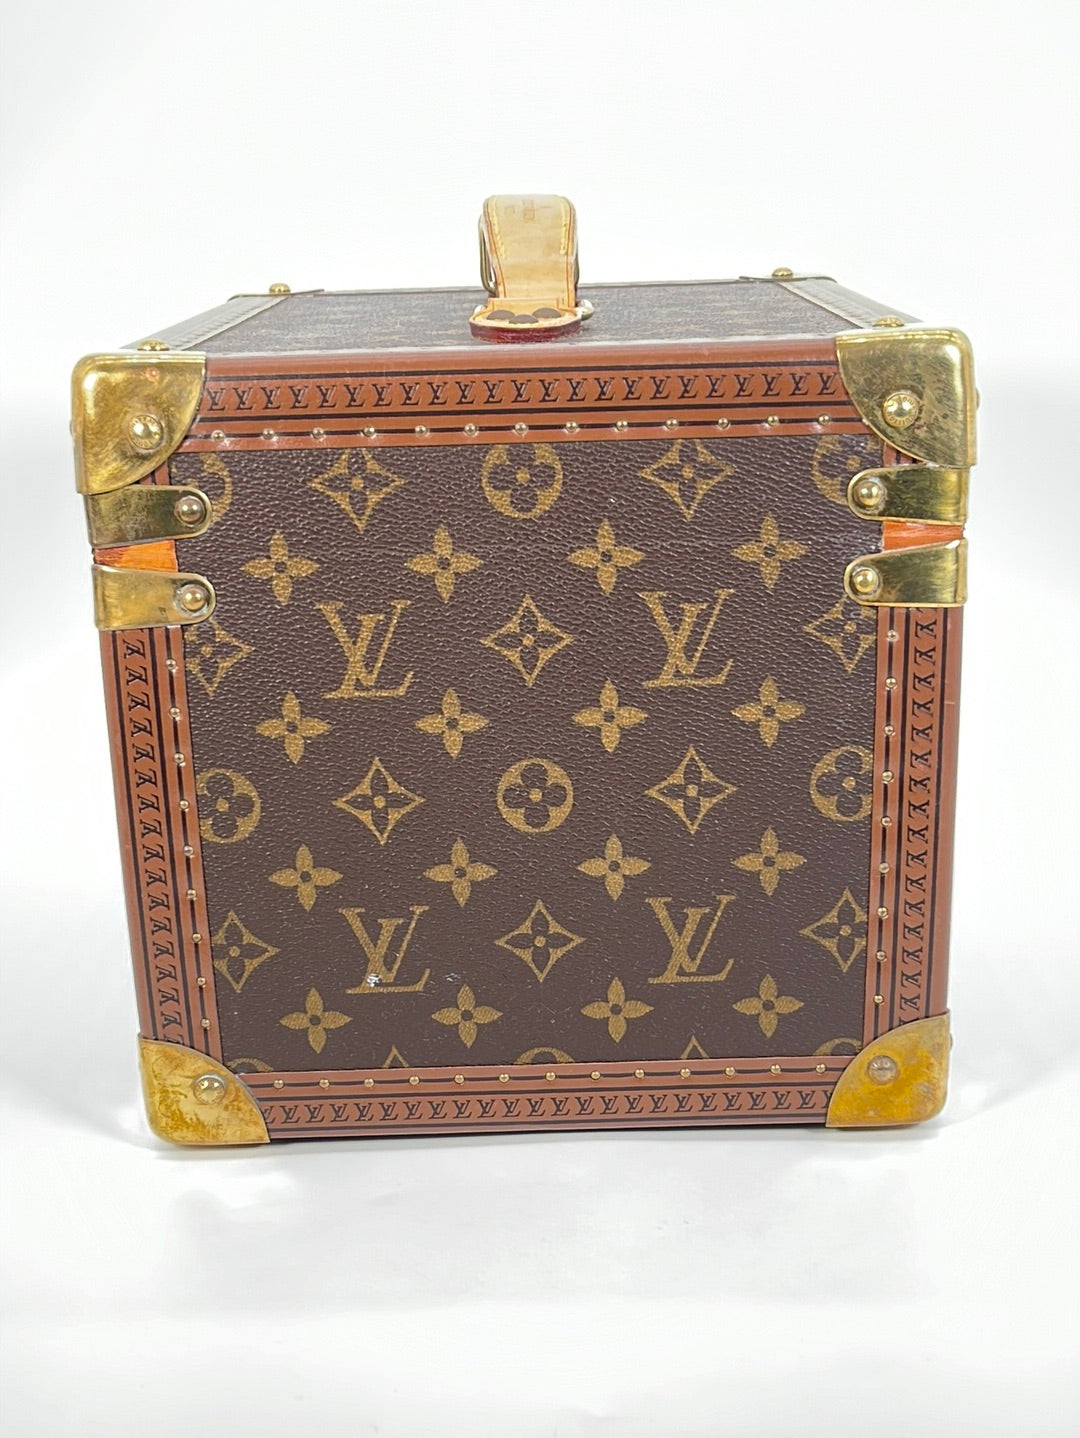 Louis Vuitton Boite Flacons Beauty Hard Case Trunk (Authentic Pre-Owned)  Leather